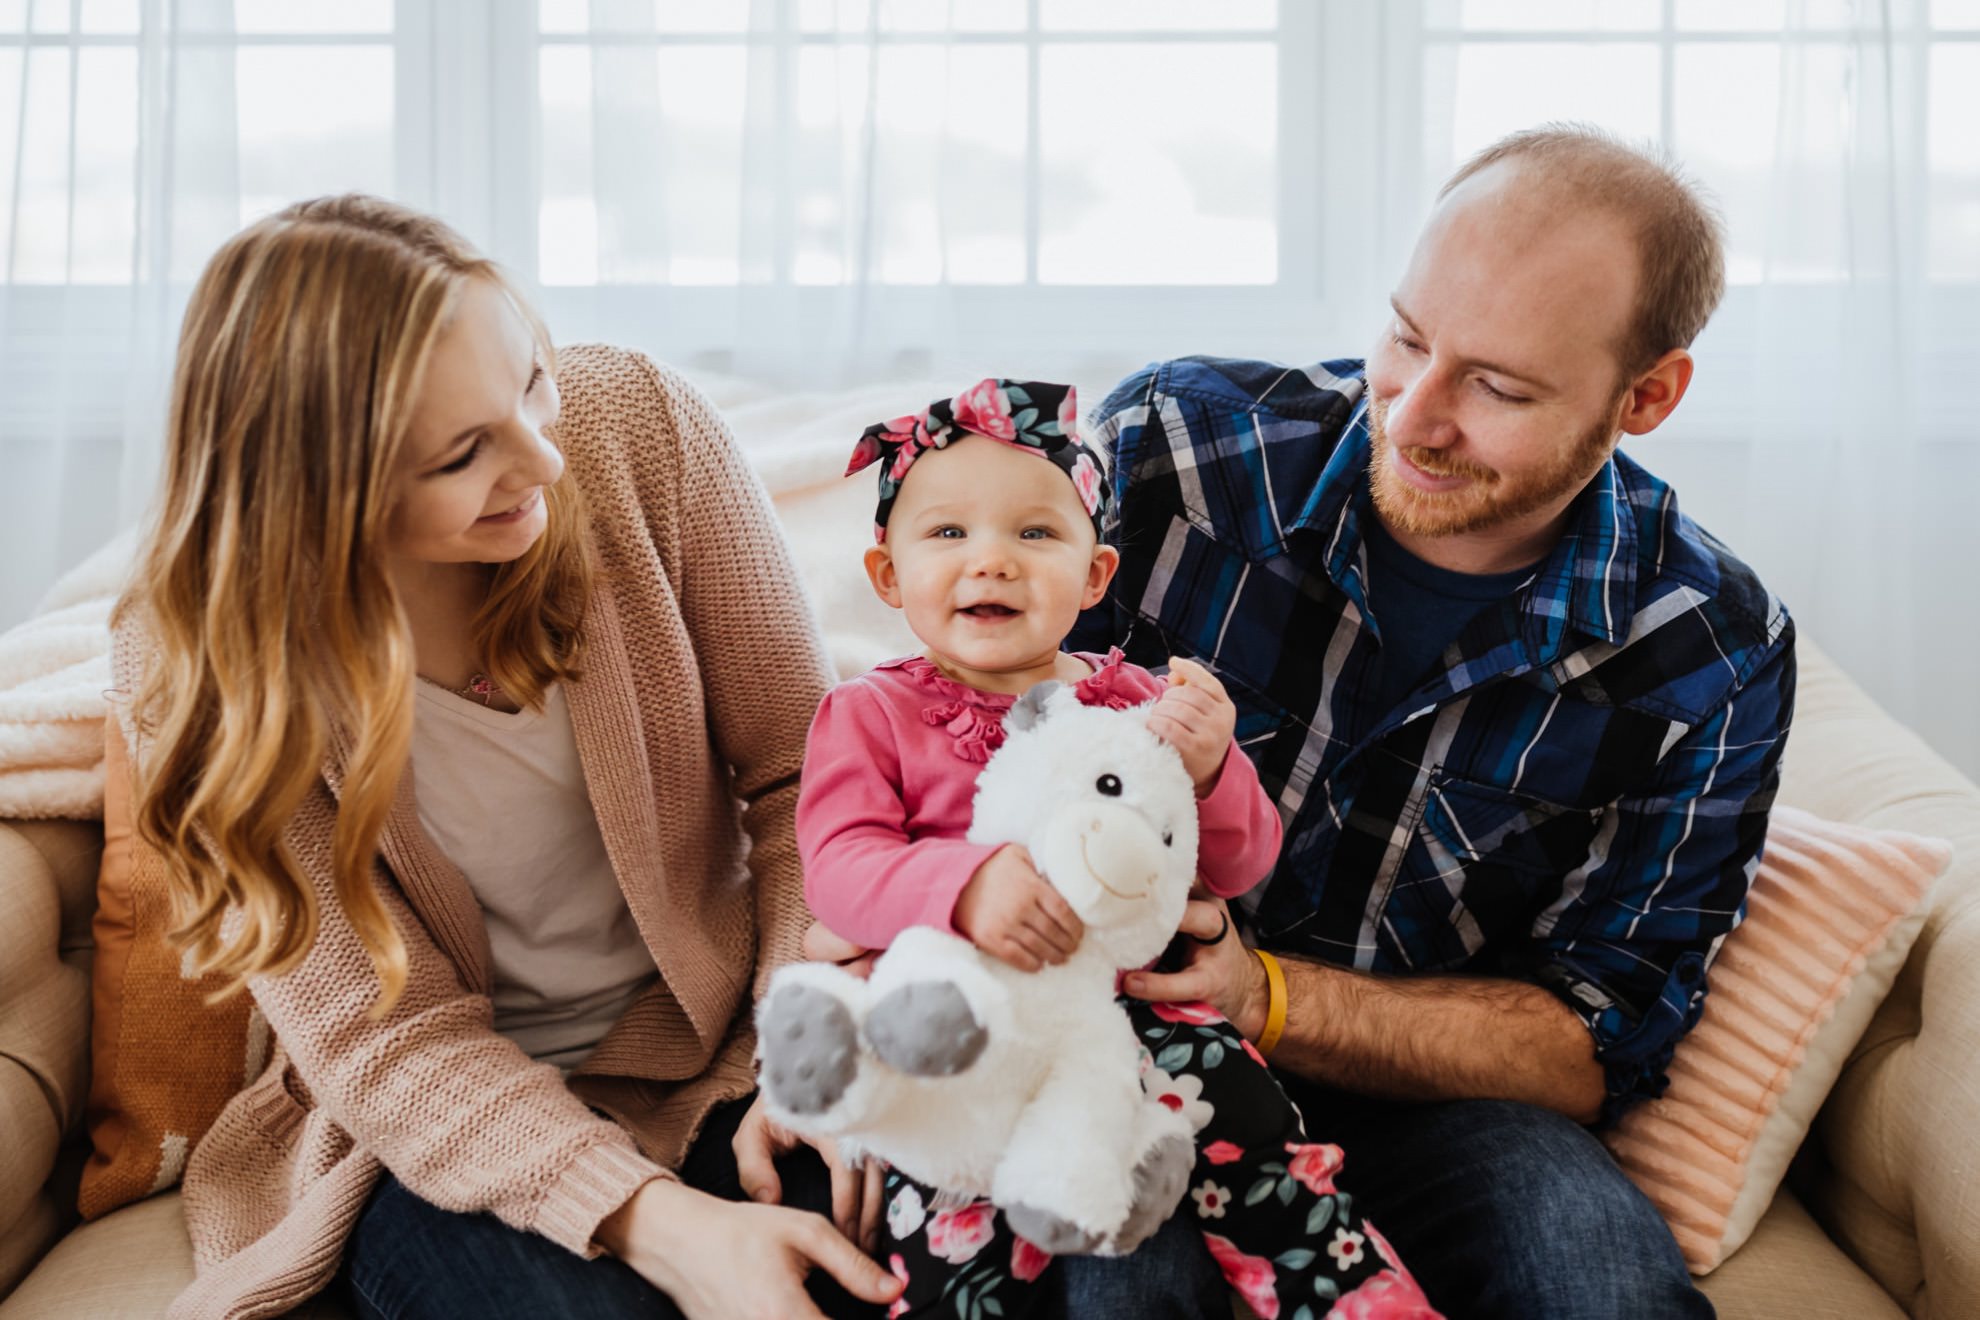 parents smiling at one year old girl on couch